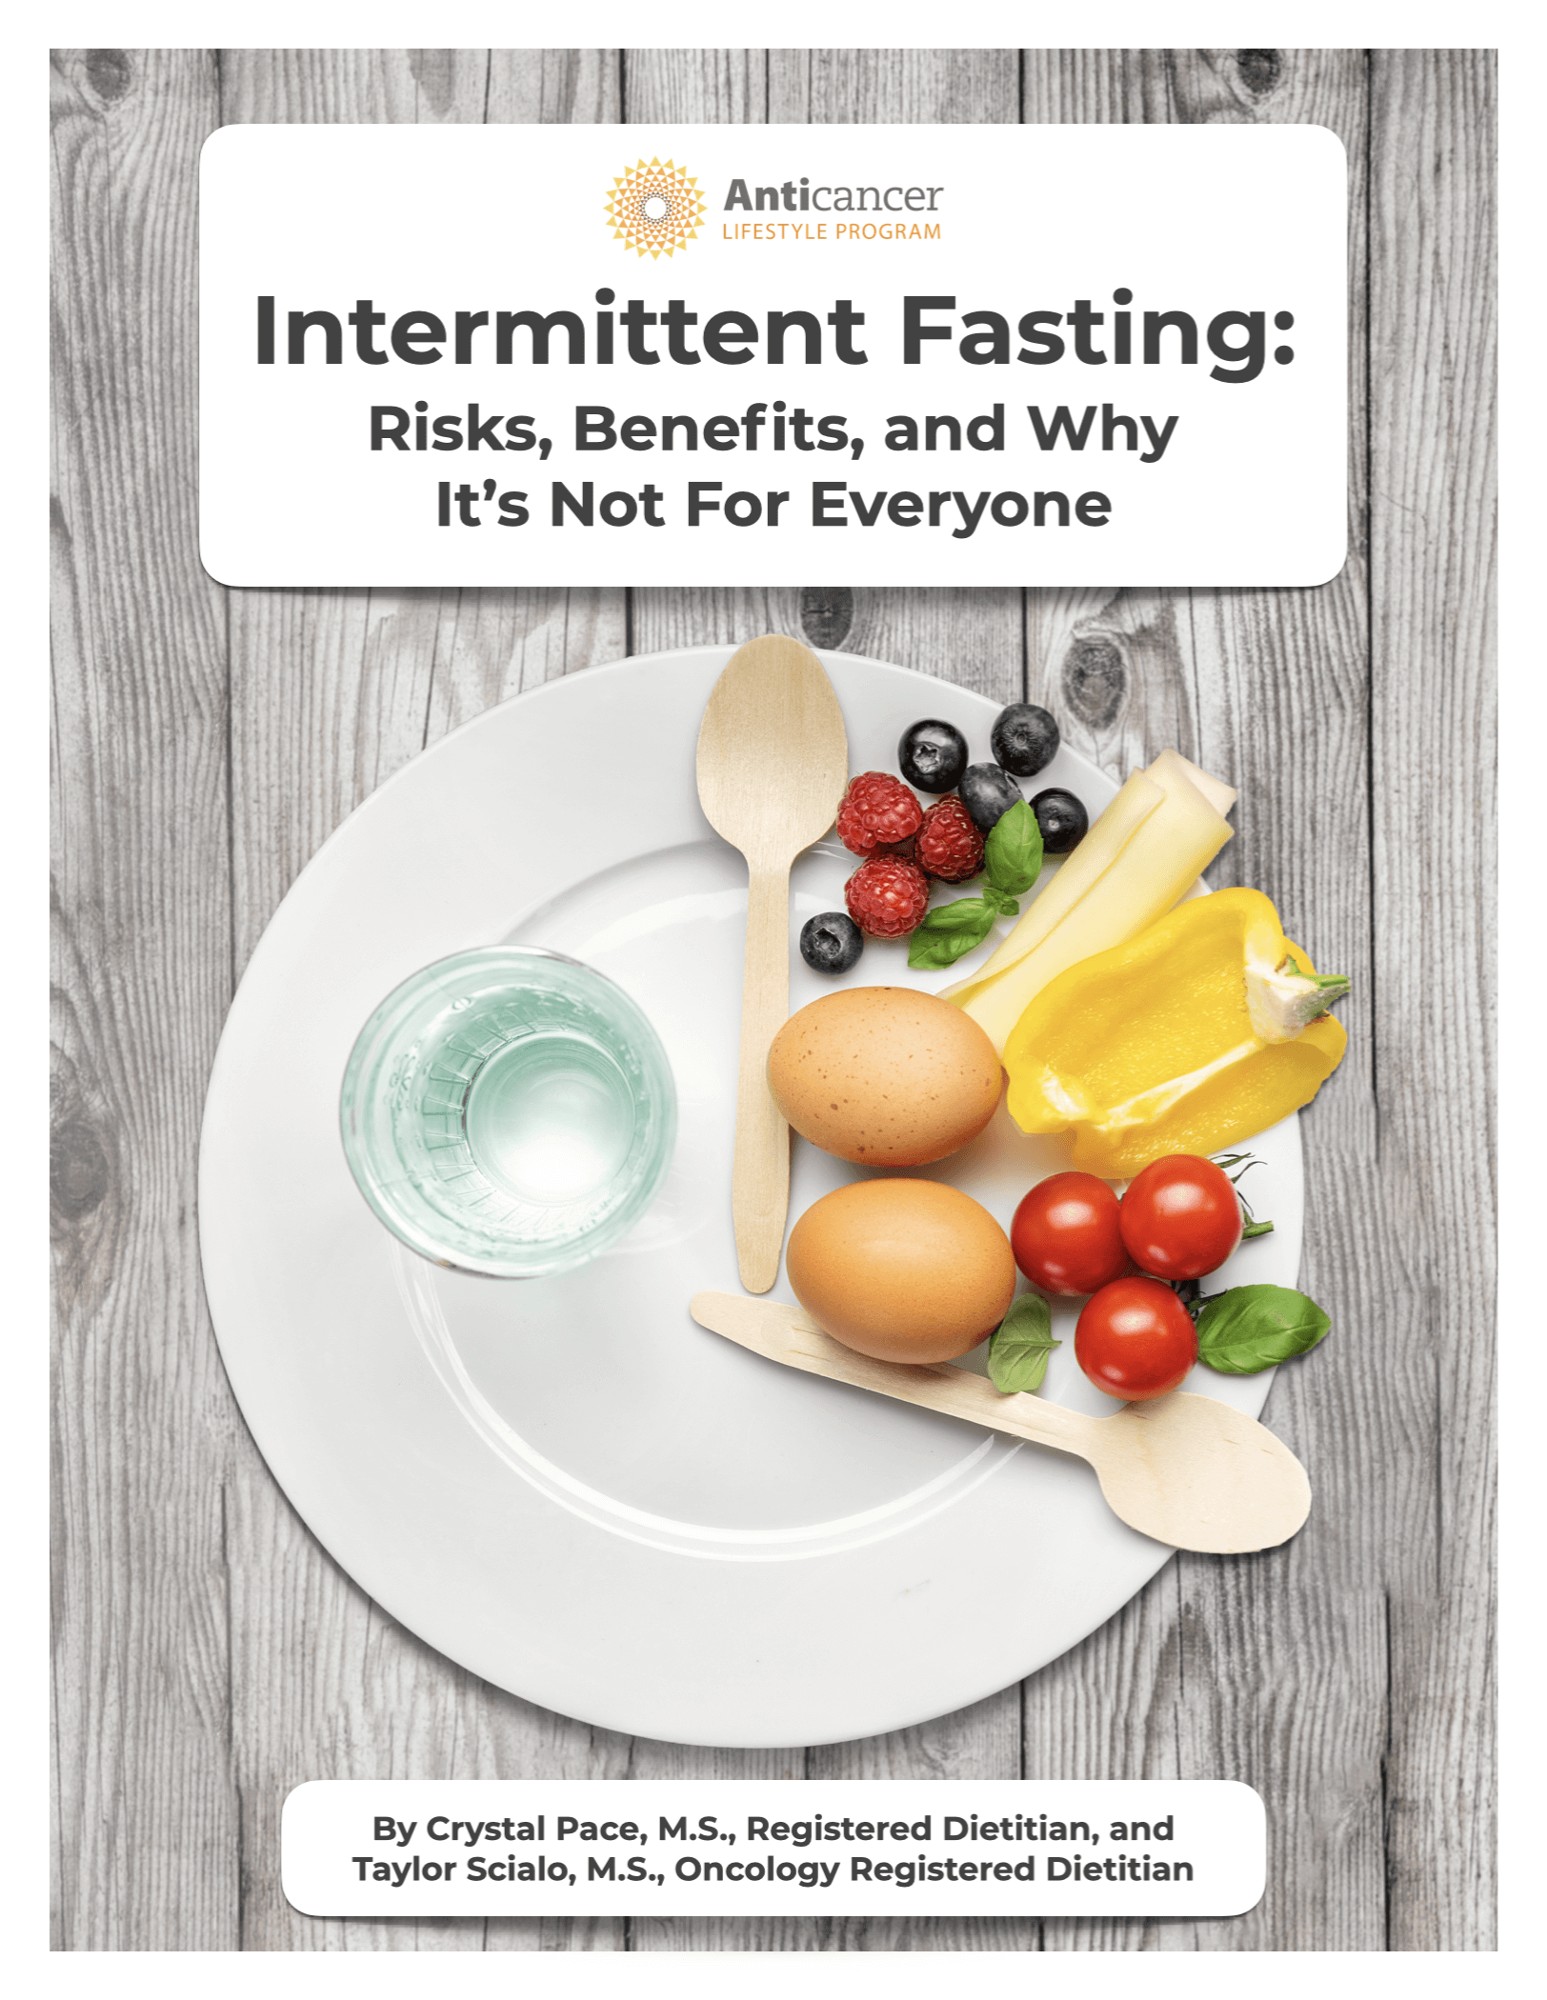 Intermittent Fasting: Risks, Benefits, and Why It’s Not For Everyone